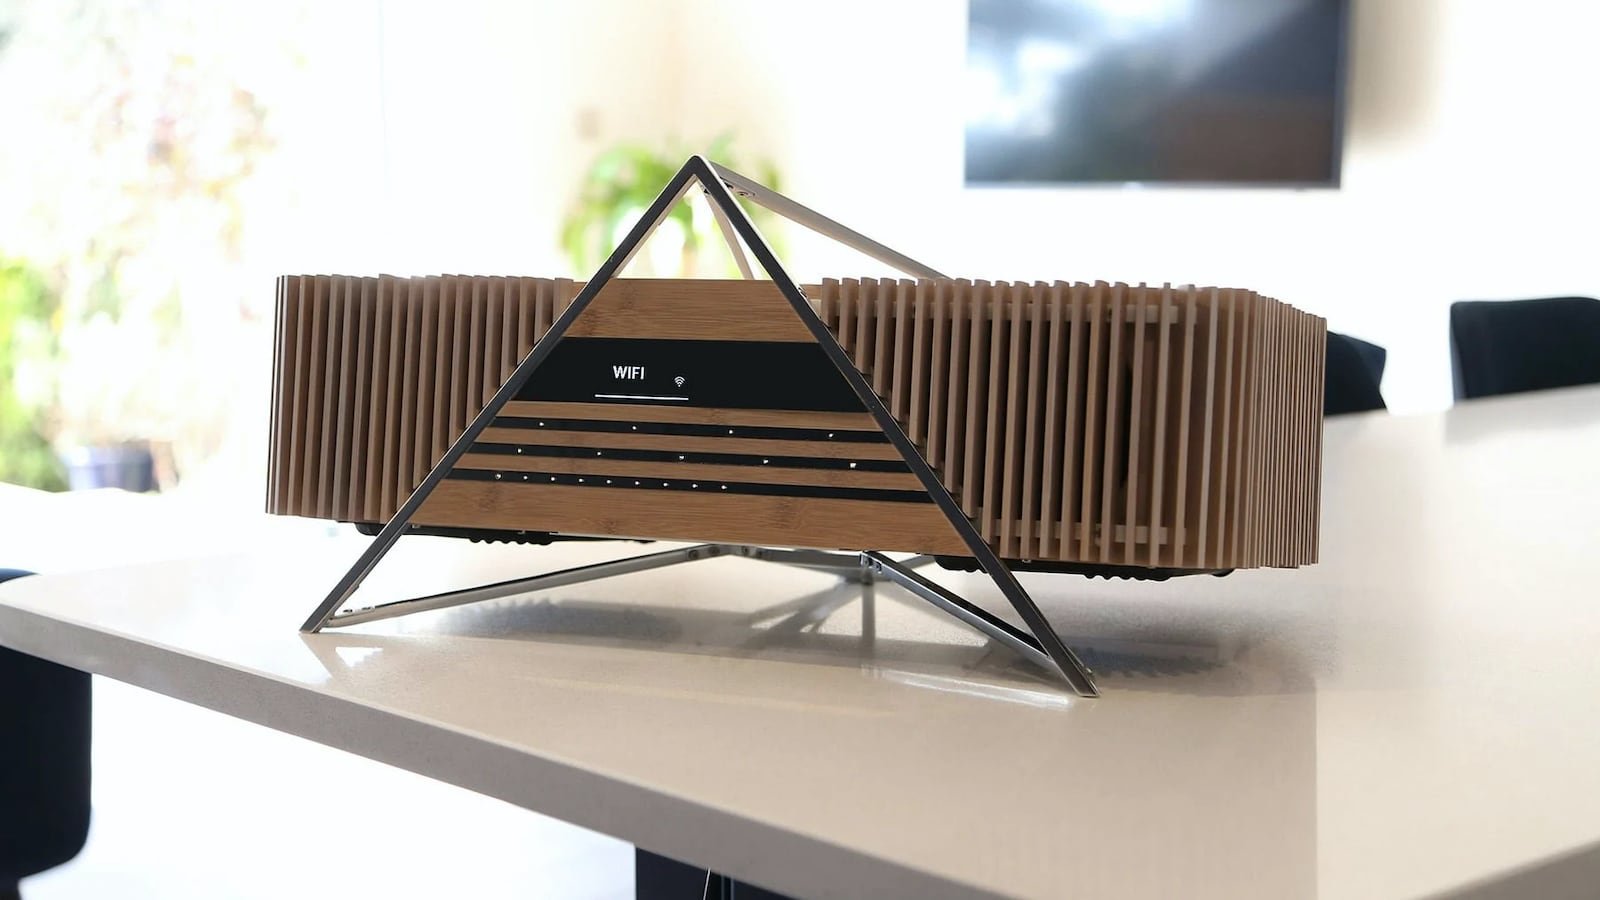 iFi Aurora Wireless Bamboo Music System is a head-turning design statement with AirPlay support